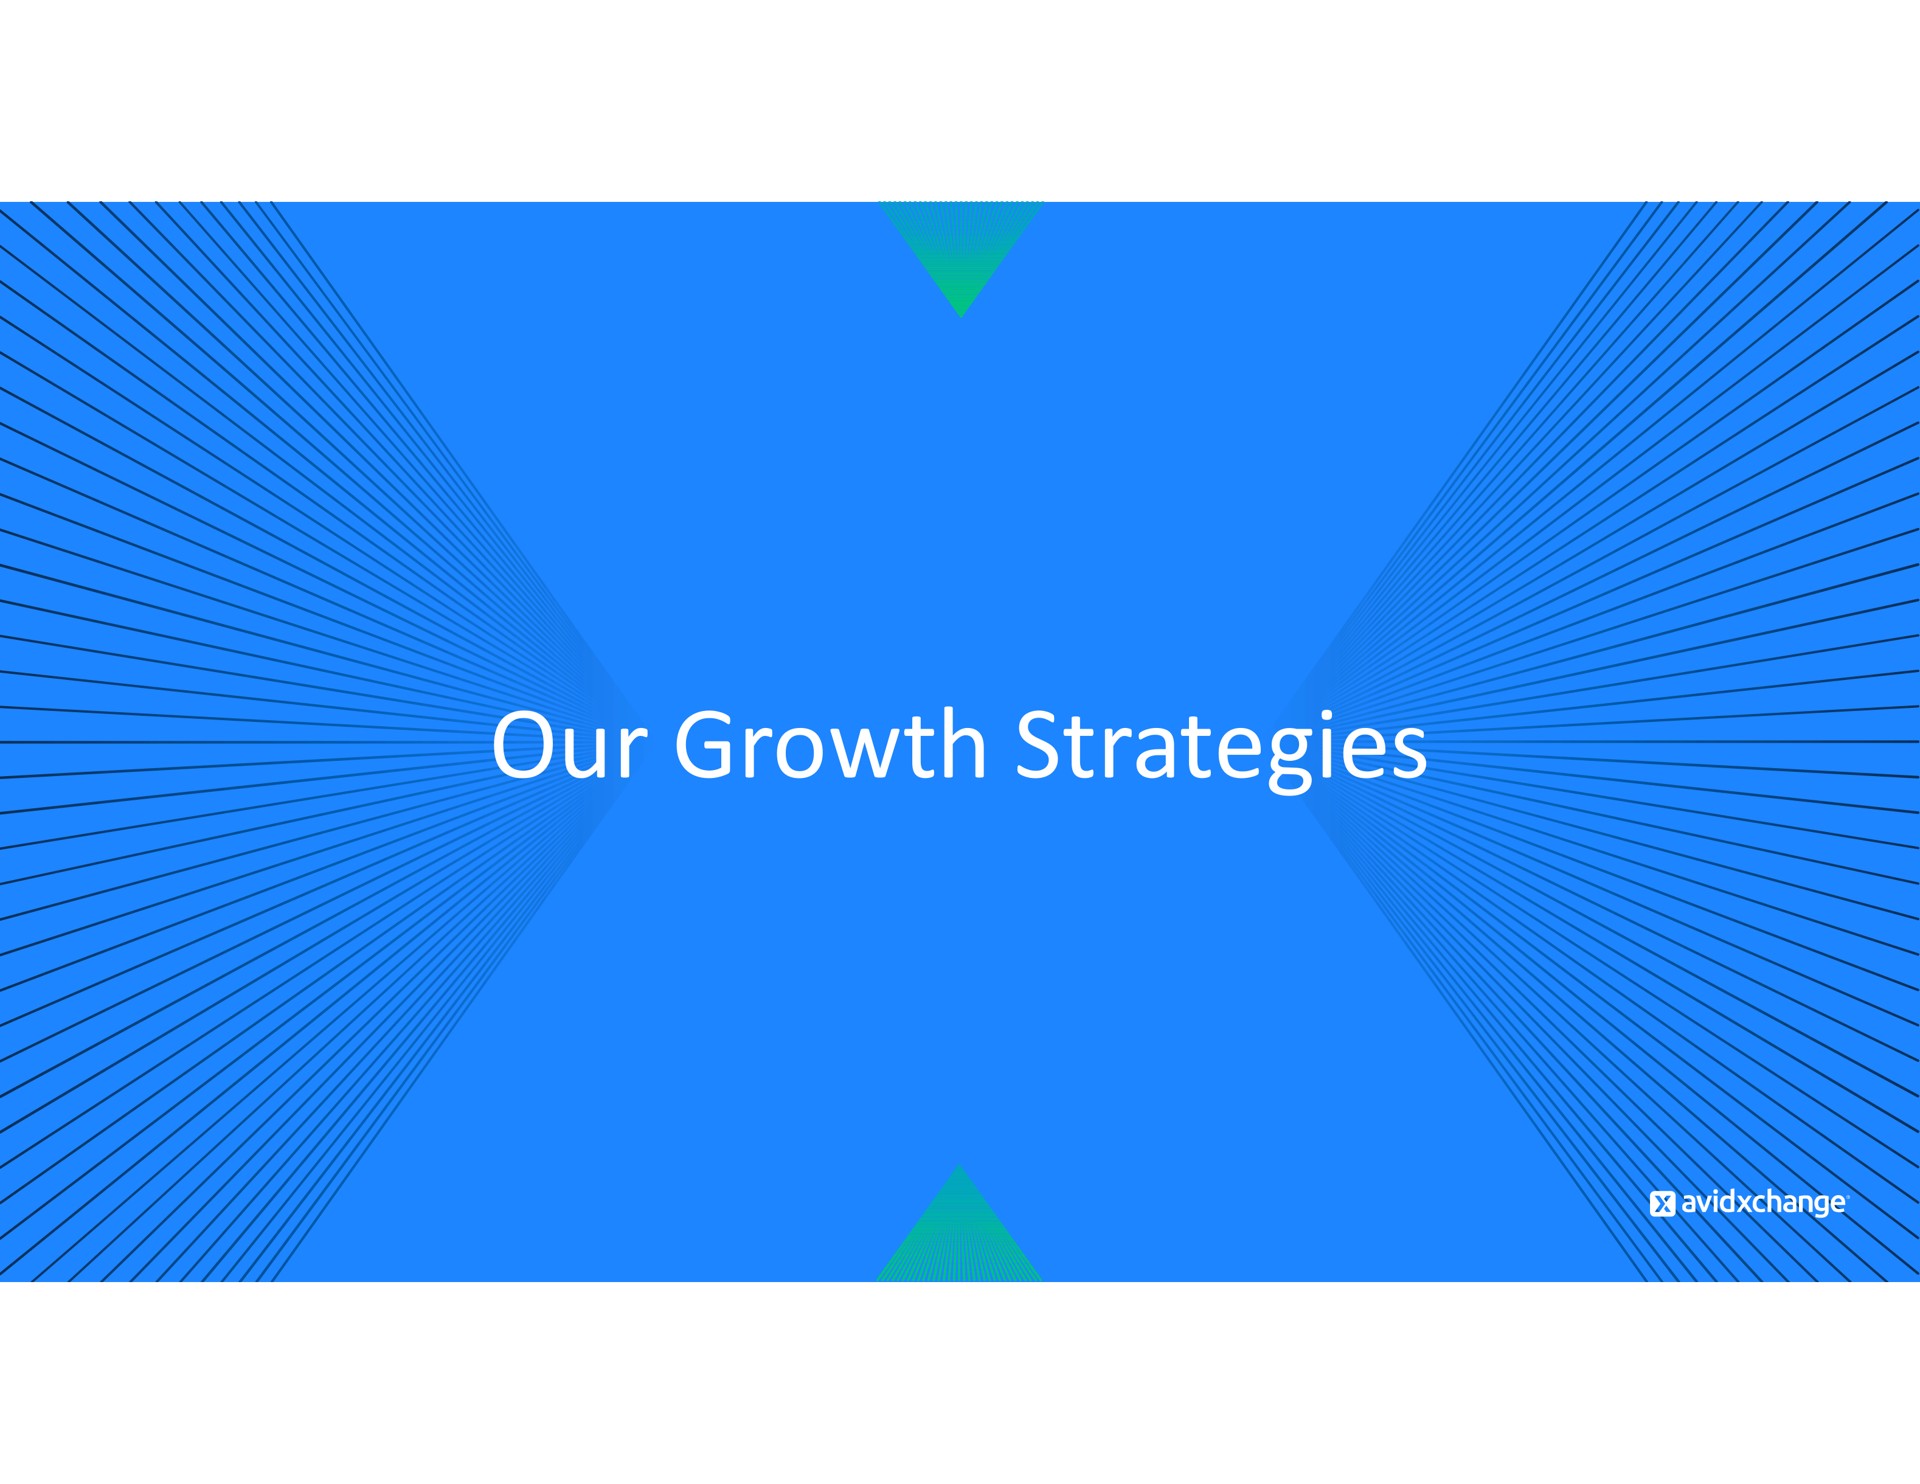 our growth strategies | AvidXchange